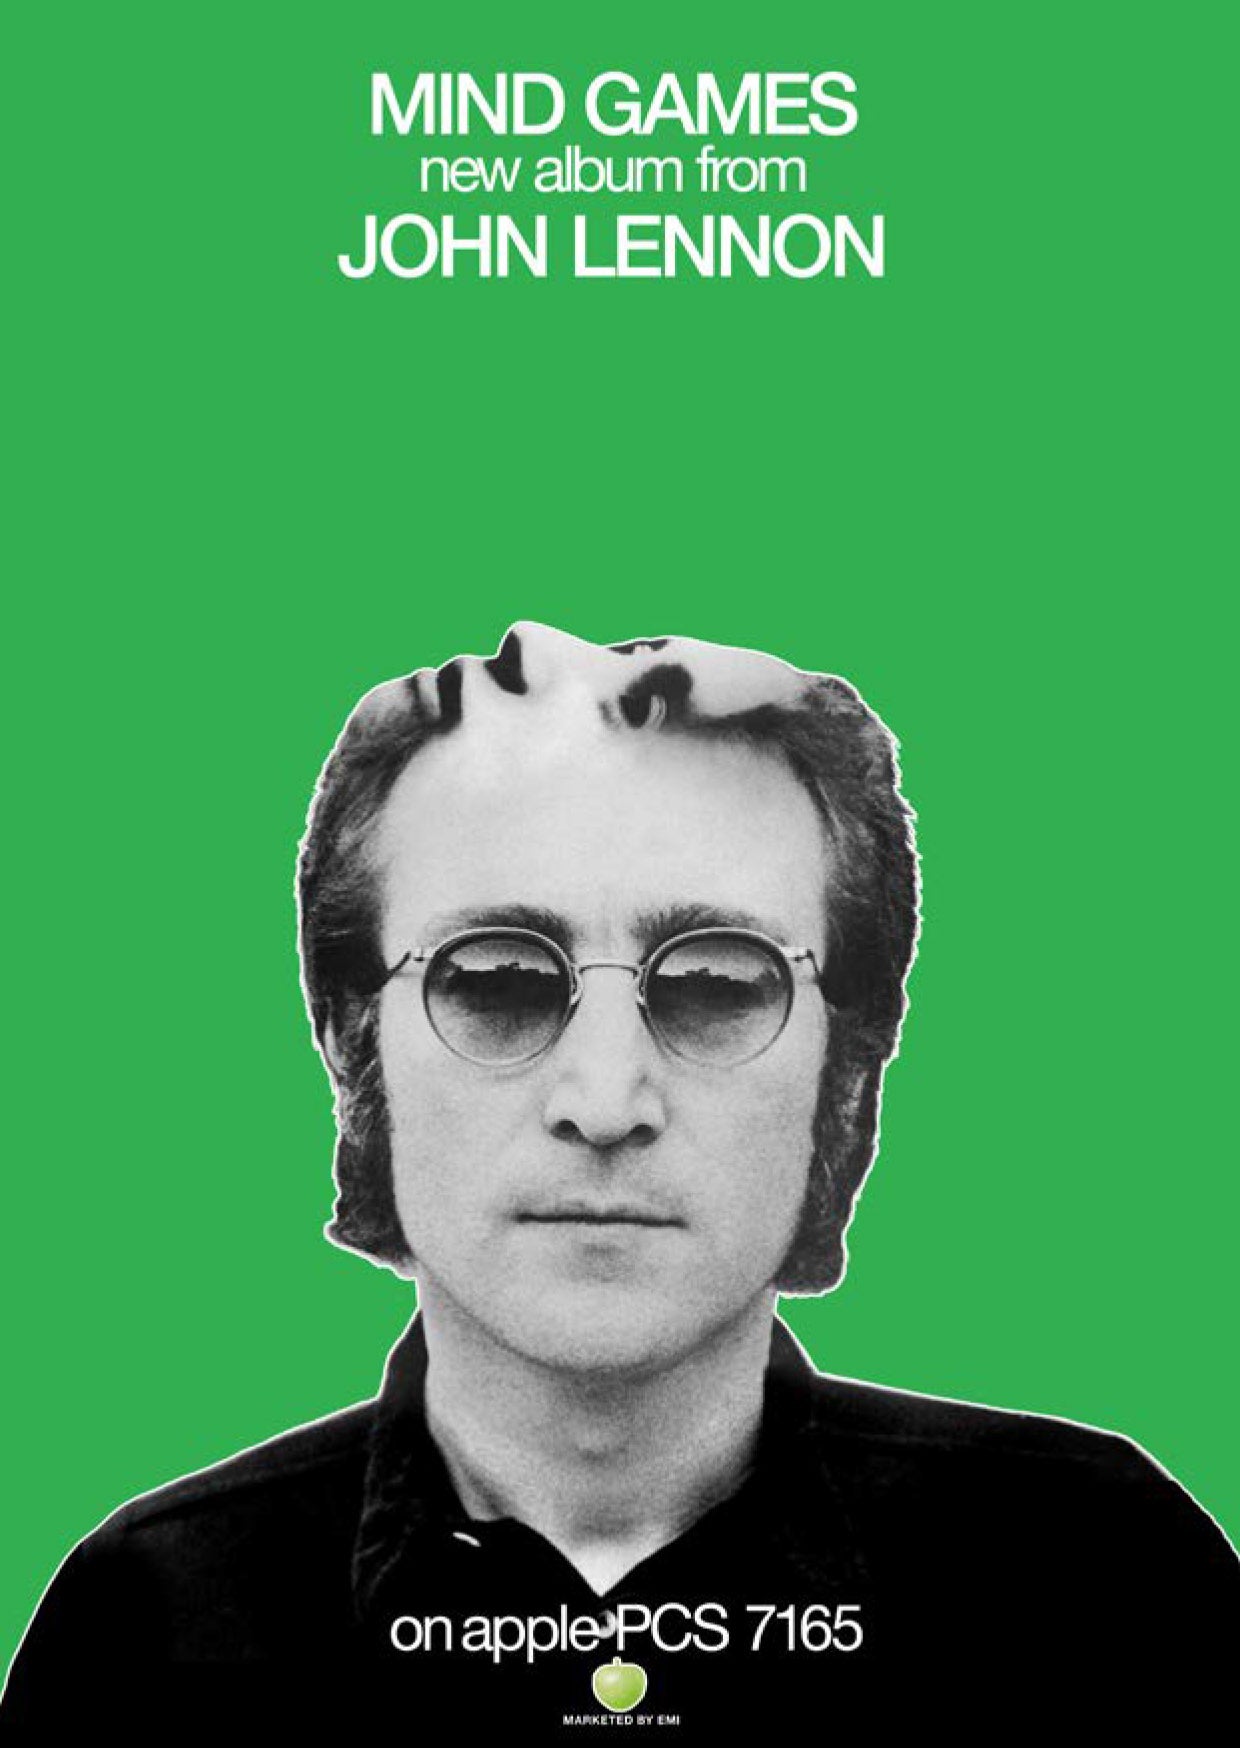 John Lennon, Yoko Ono - Mind Games (The Ultimate Collection): Deluxe Box Set